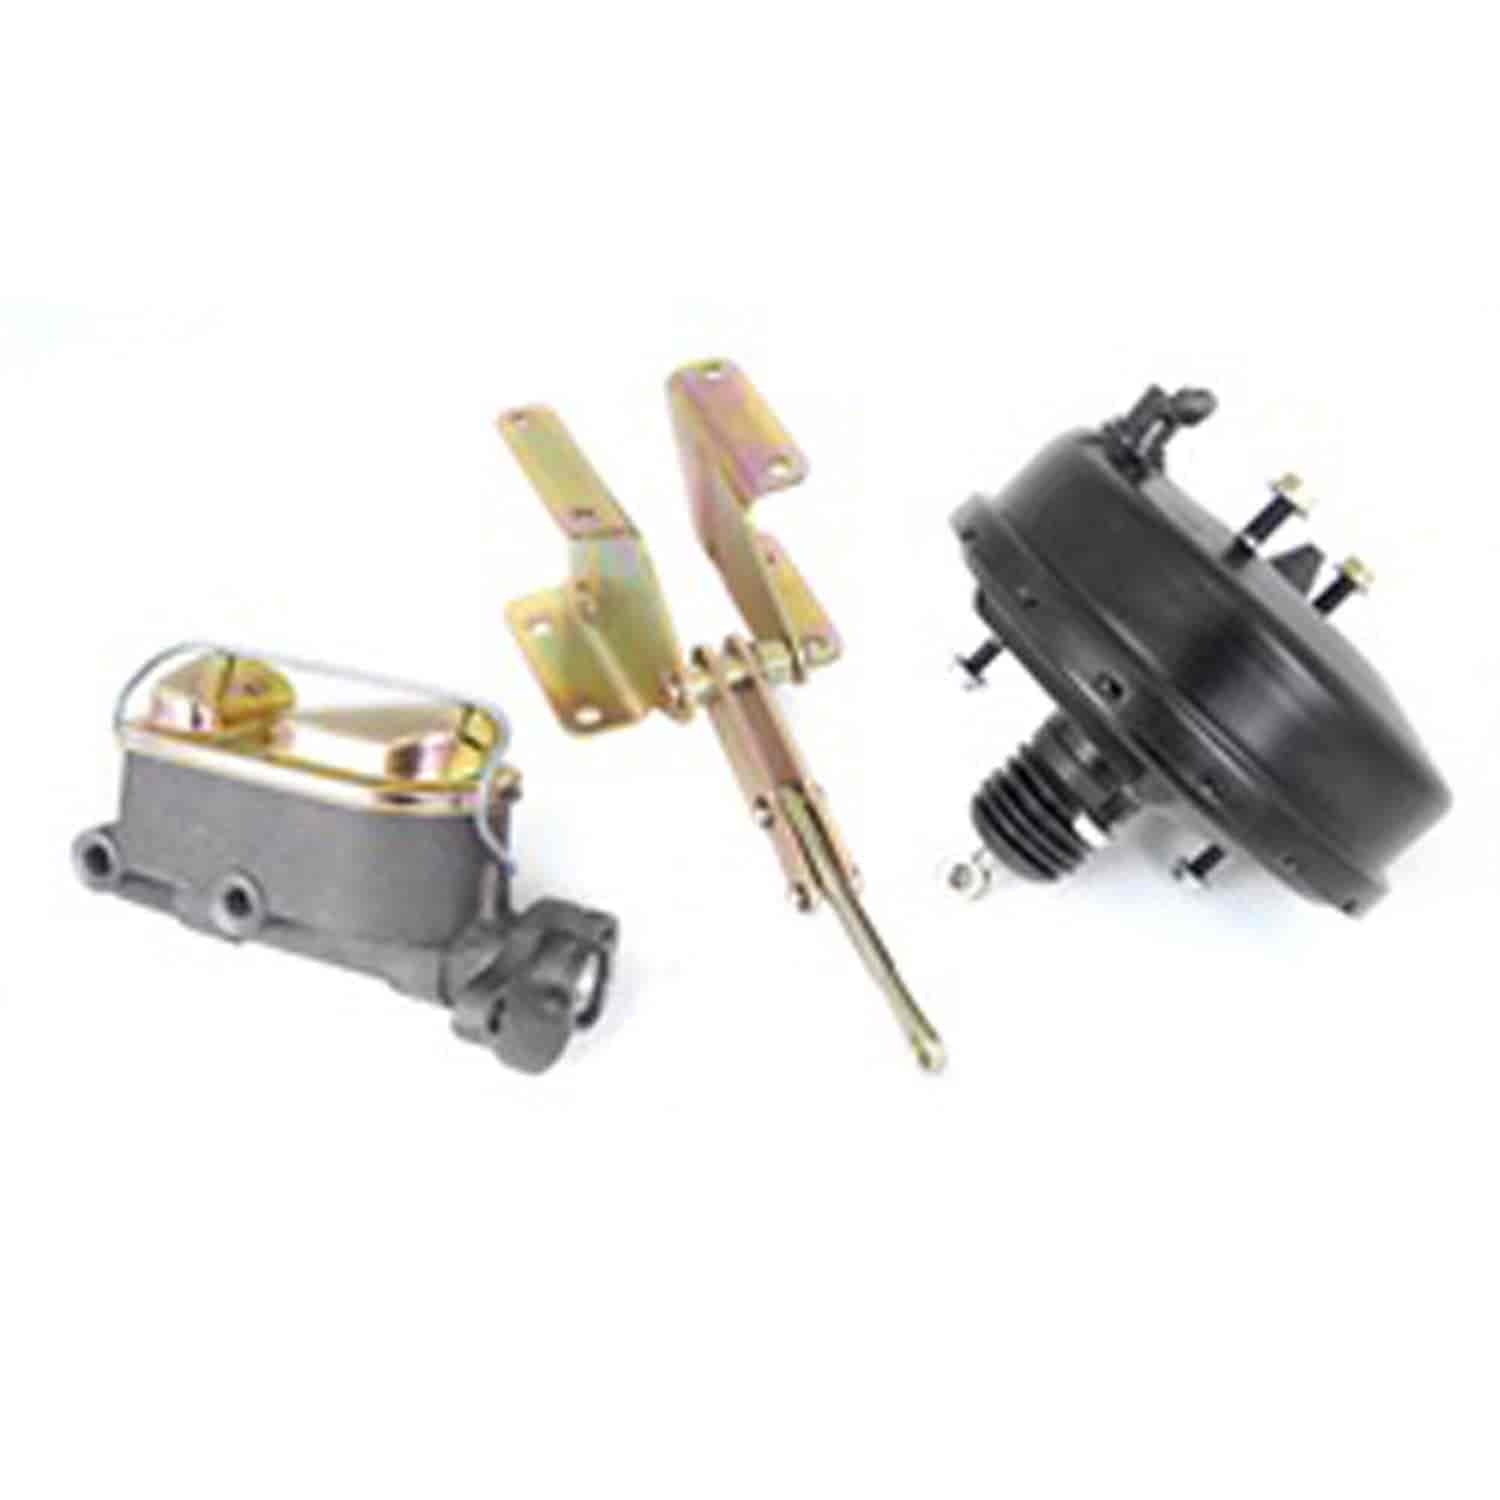 This power brake booster kit from Omix-ADA fits 78-81 Jeep CJ5 78-86 CJ7 and 81-86 CJ8 with 2-bolt brake calipers.